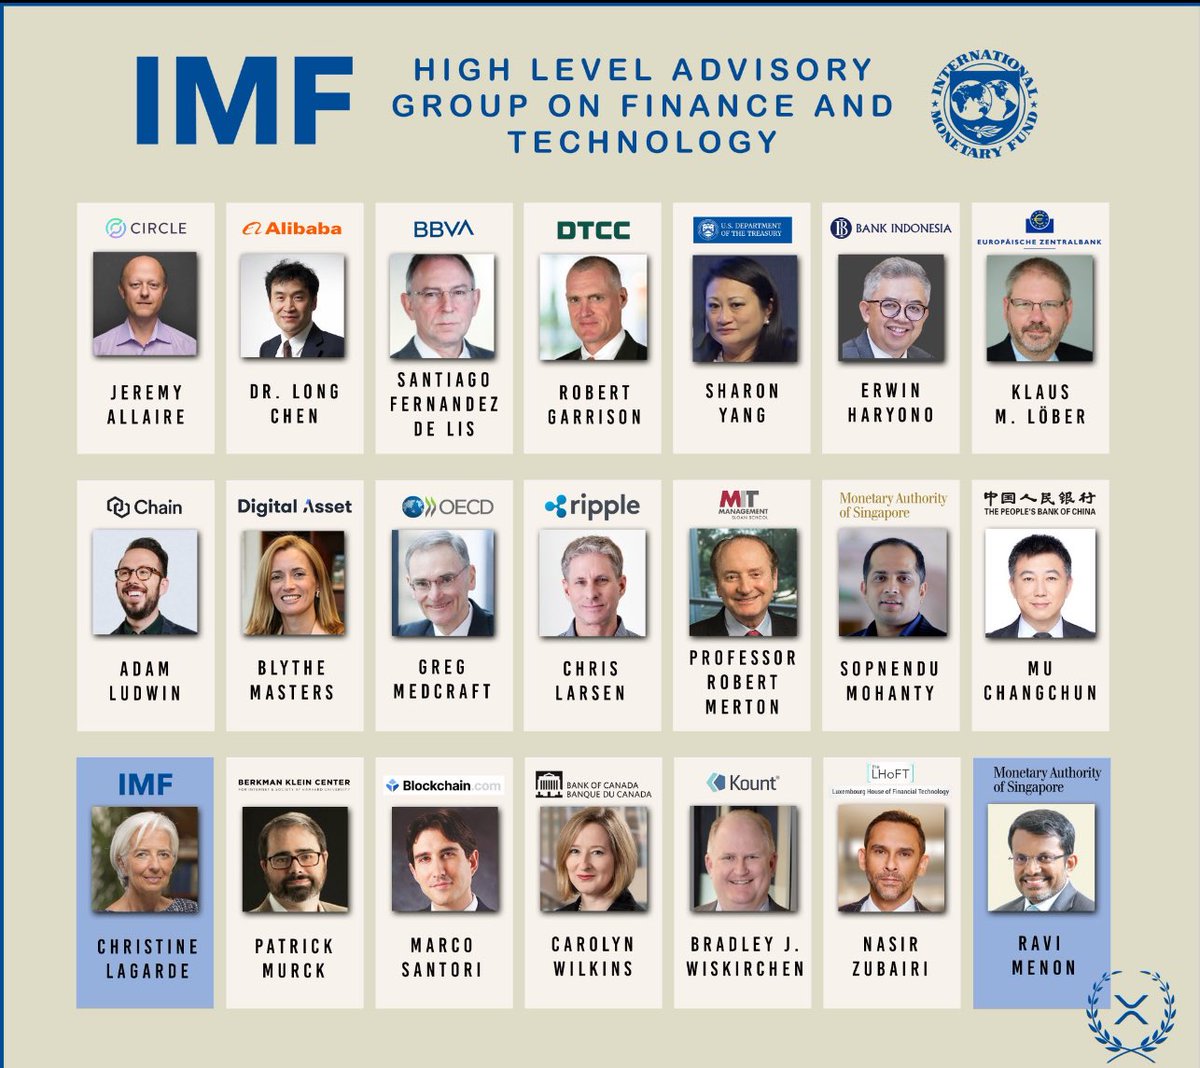 BREAKING: 🚨 Chris Larsen appears as a member of “ The #IMF high-level advisory group on Finance and Technology” 

Notice how #Ripple’s Executive Chair and Co-Founder features right in the center. 💥

Source: @DROPZXRP